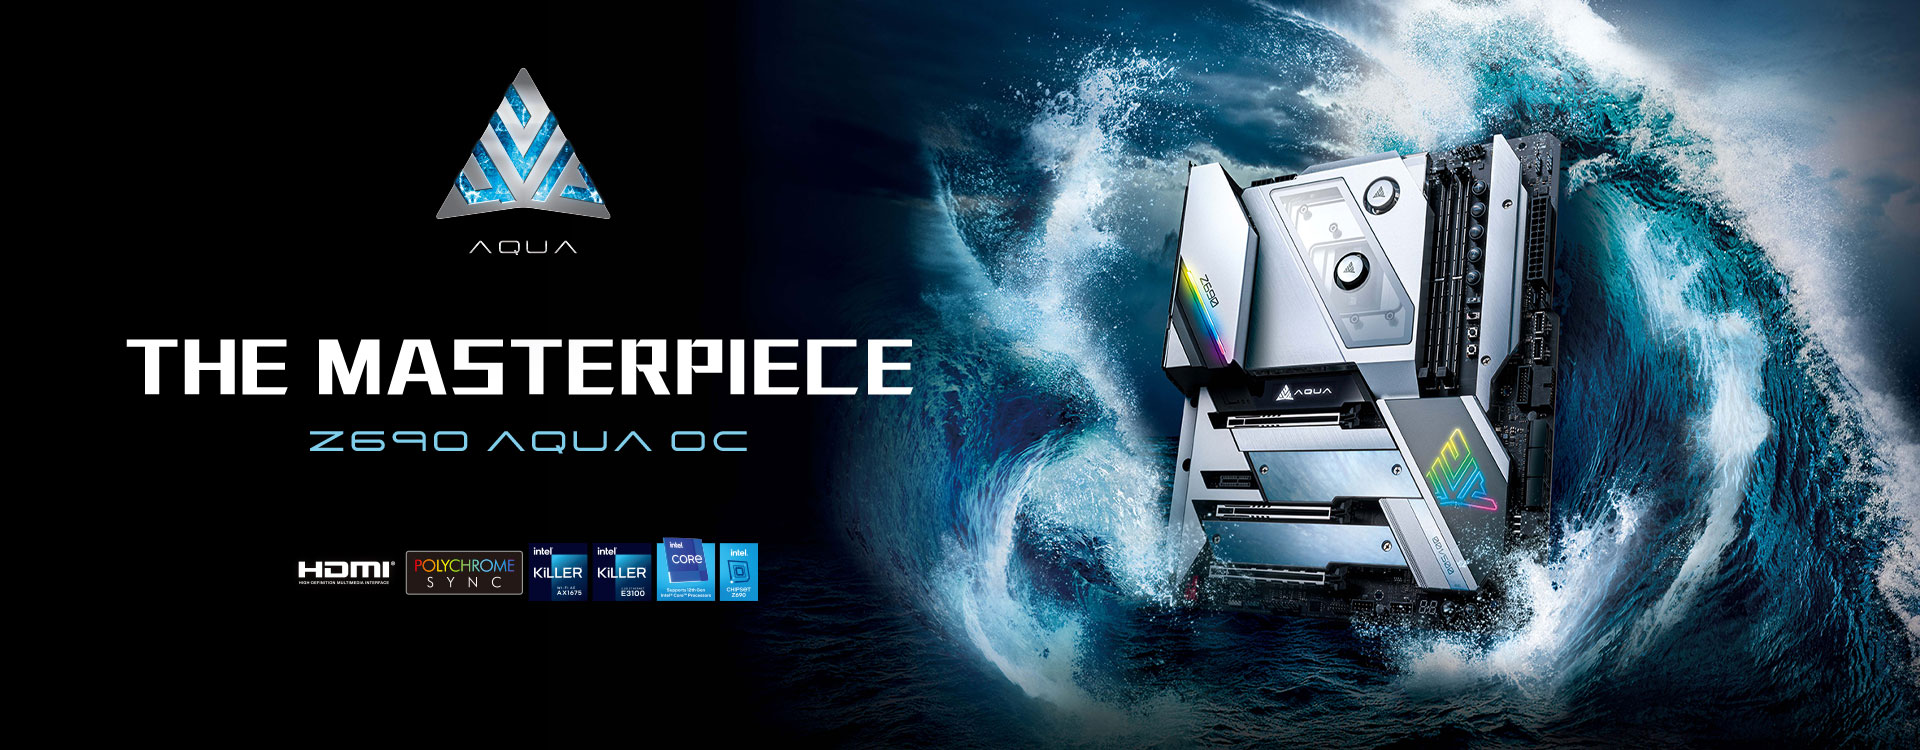 ASRock Launches Limited Edition Z690 AQUA and Z690 AQUA OC For extreme overclocking